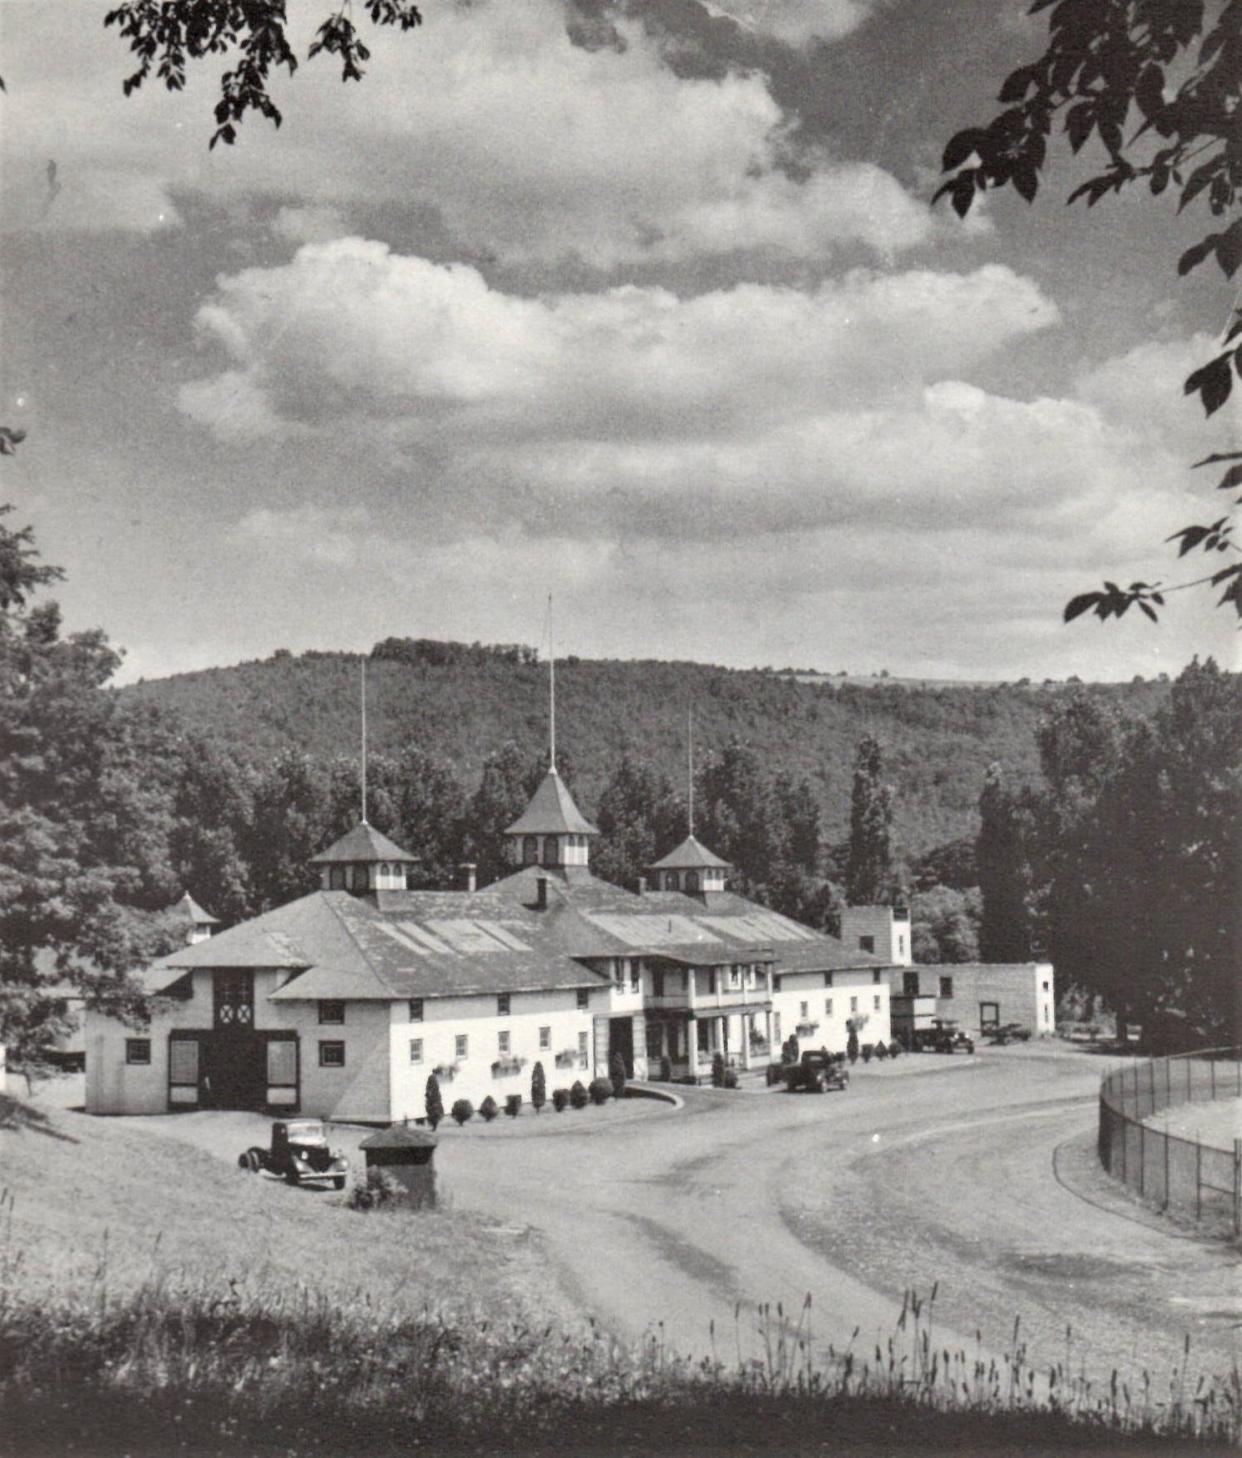 An overview of the stables at En-Joie Park, about 1940.